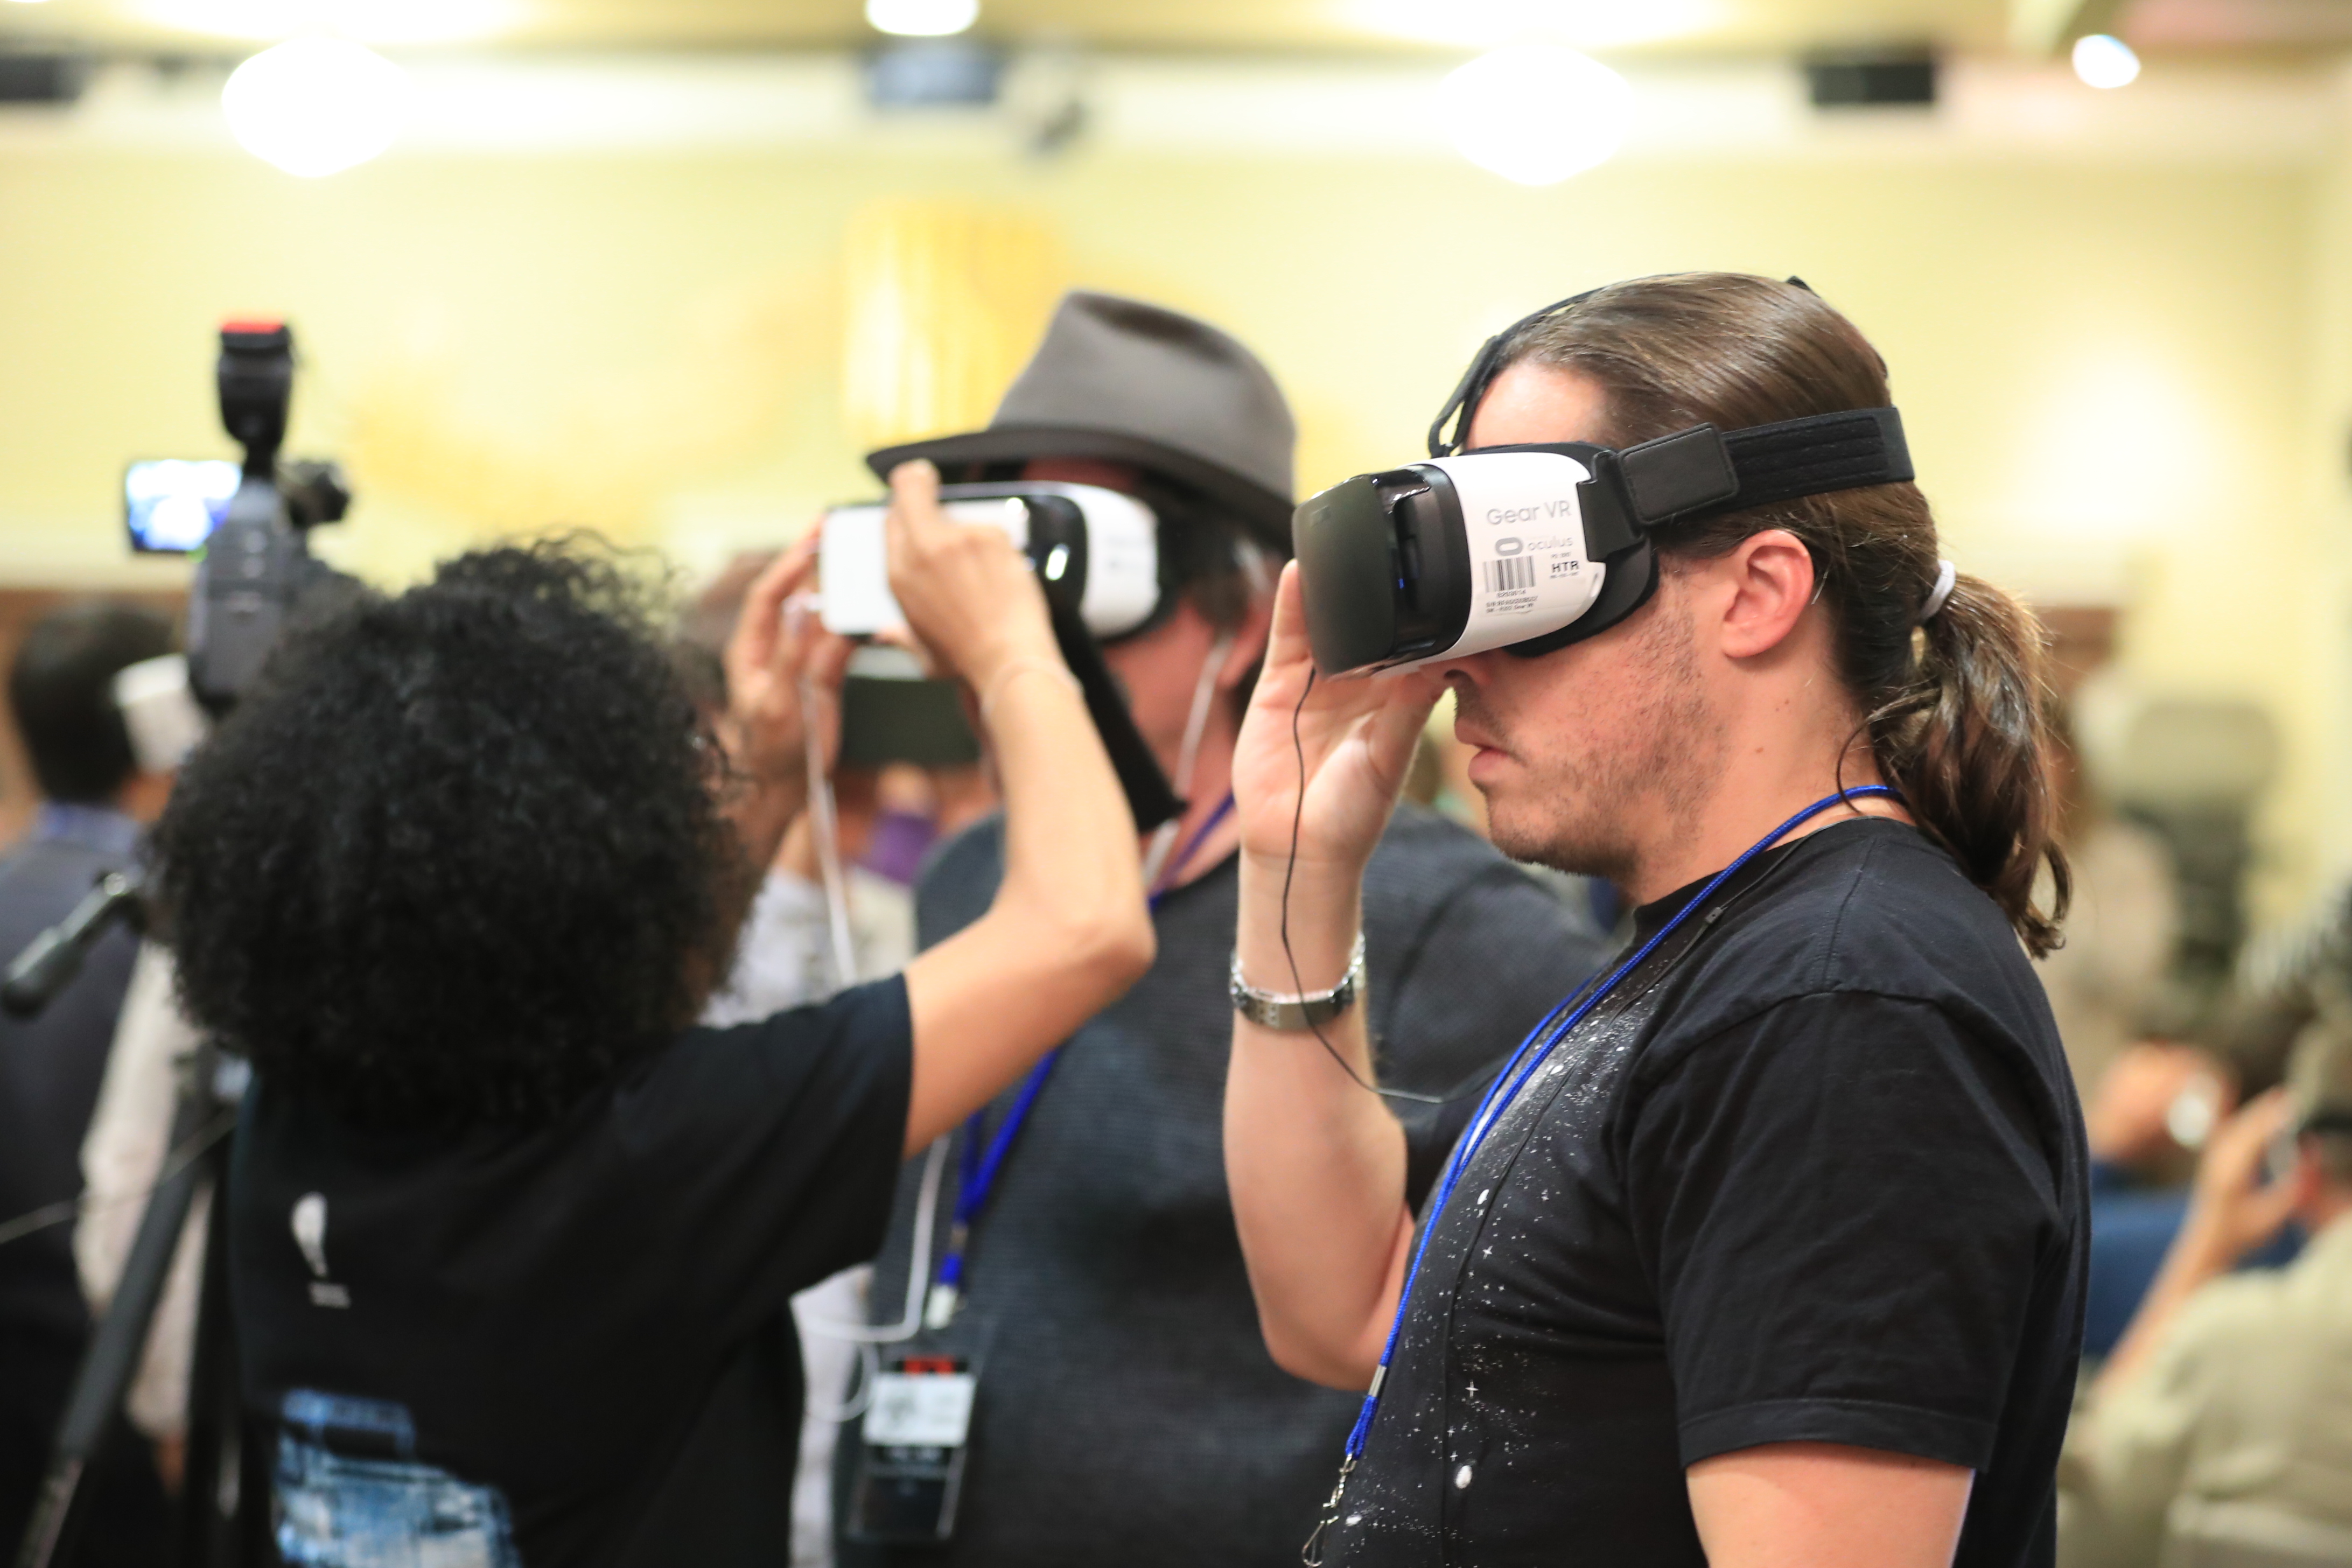 ICE participants experienced portions of the VR demo using Oculus Gear VR headsets. Photo by James Neihouse, ASC